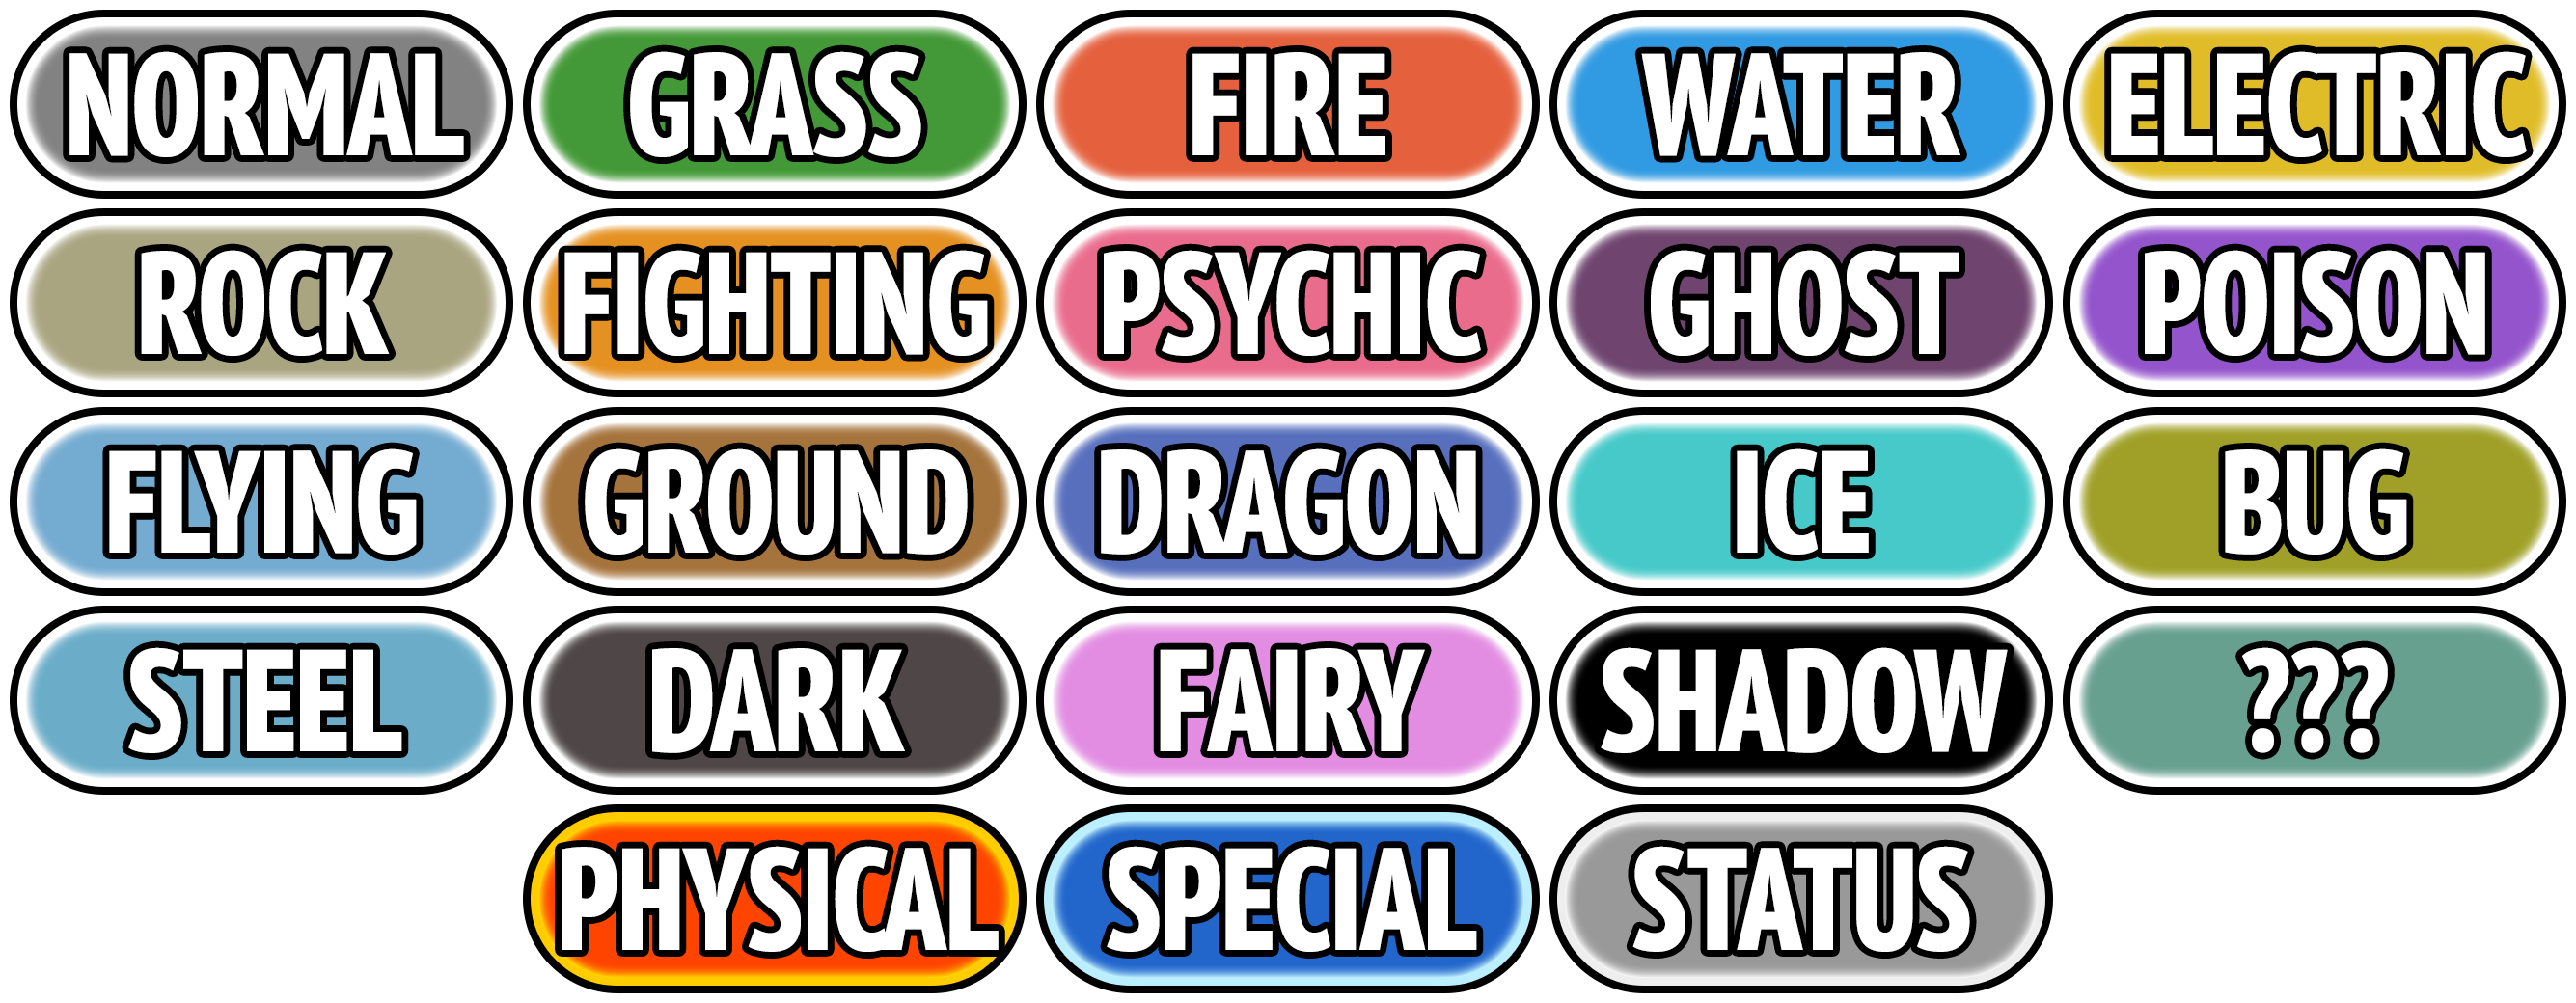 Pokemon type lists by generation. by AdeptCharon on DeviantArt